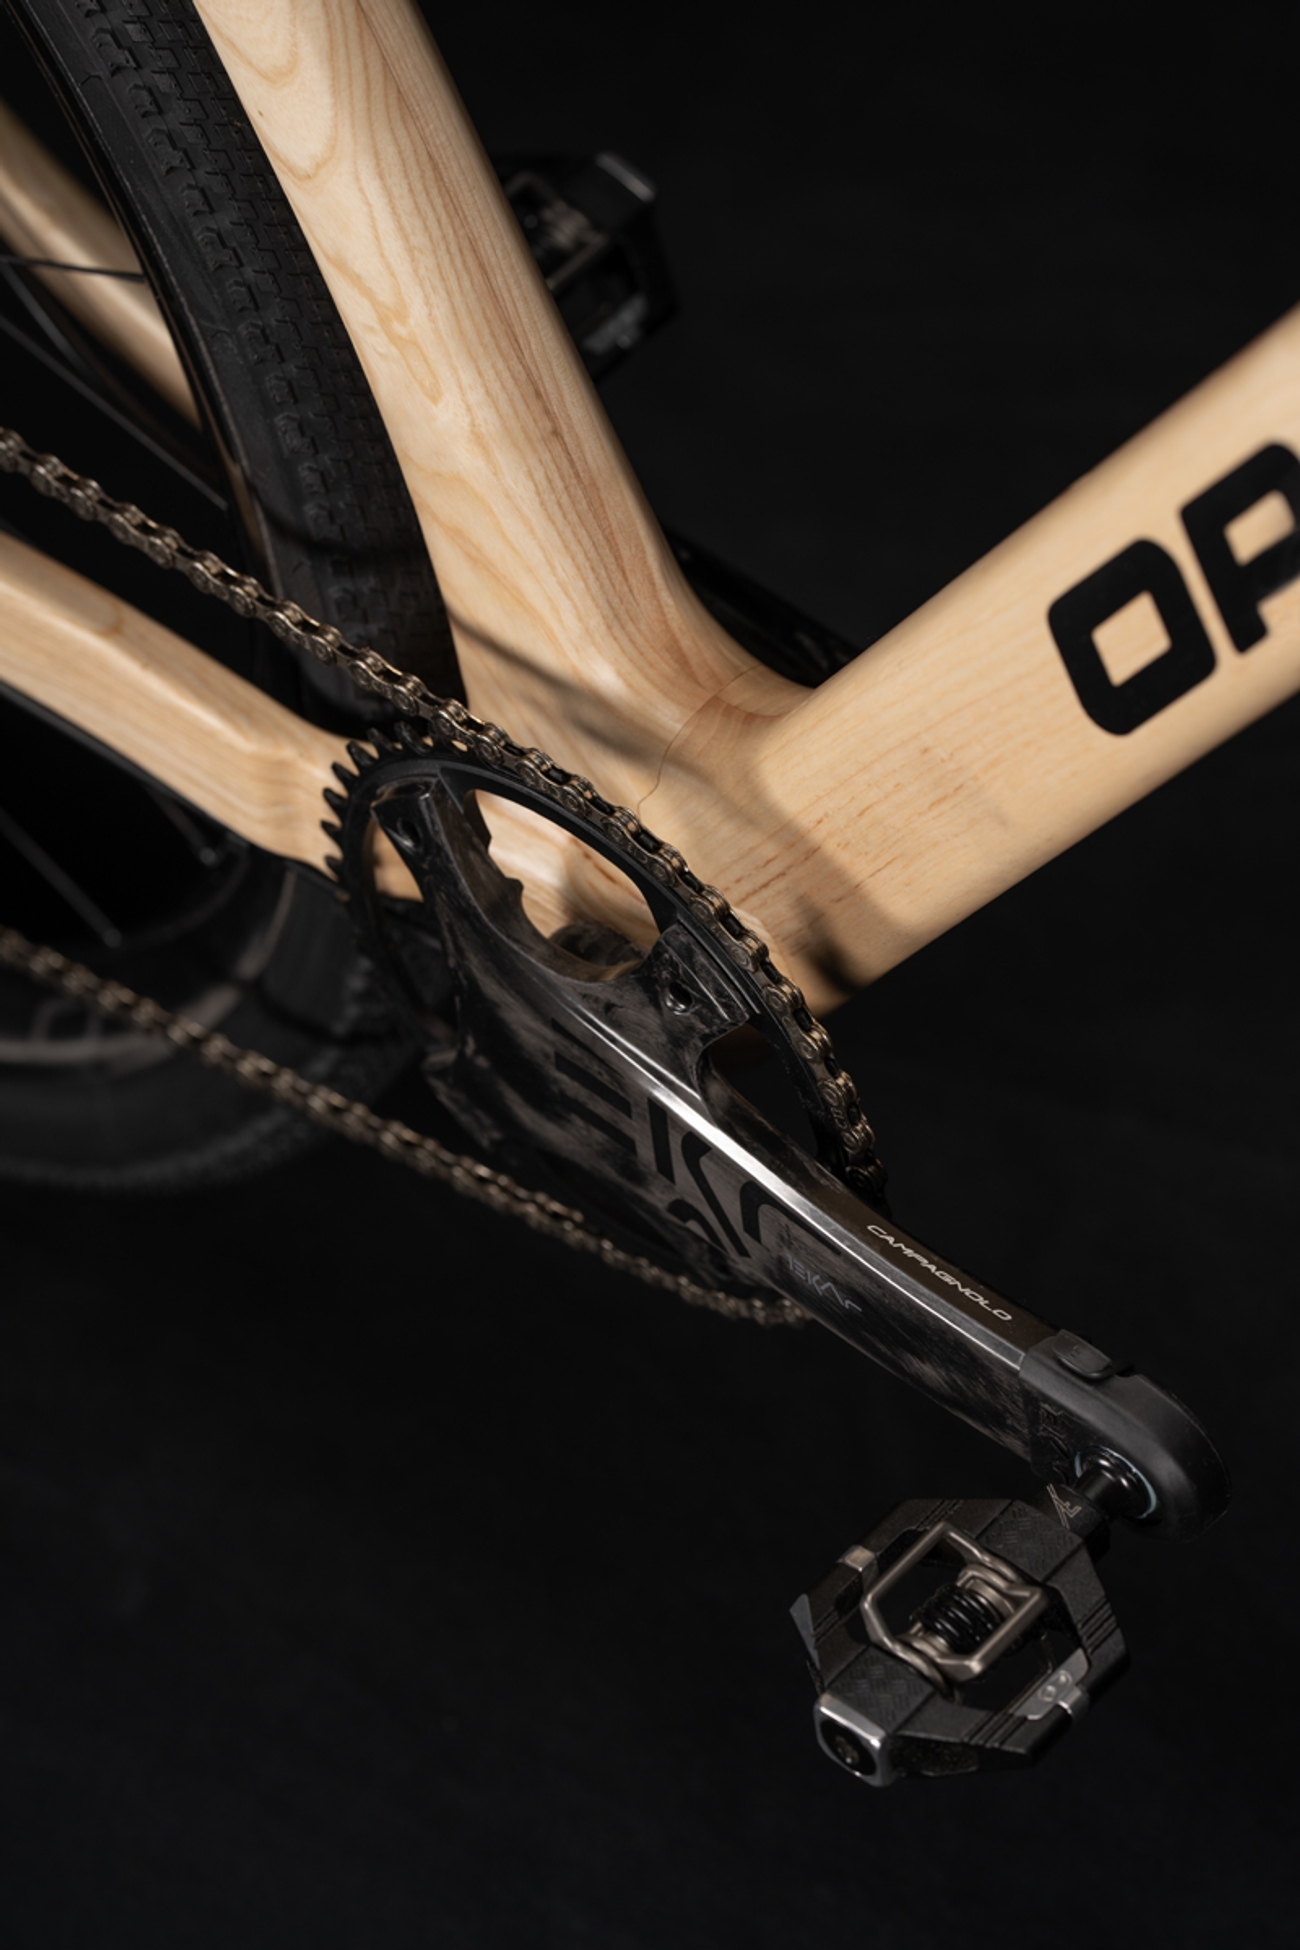 The Ornus comes in three spec options, one of which features Campagnolo Ekar